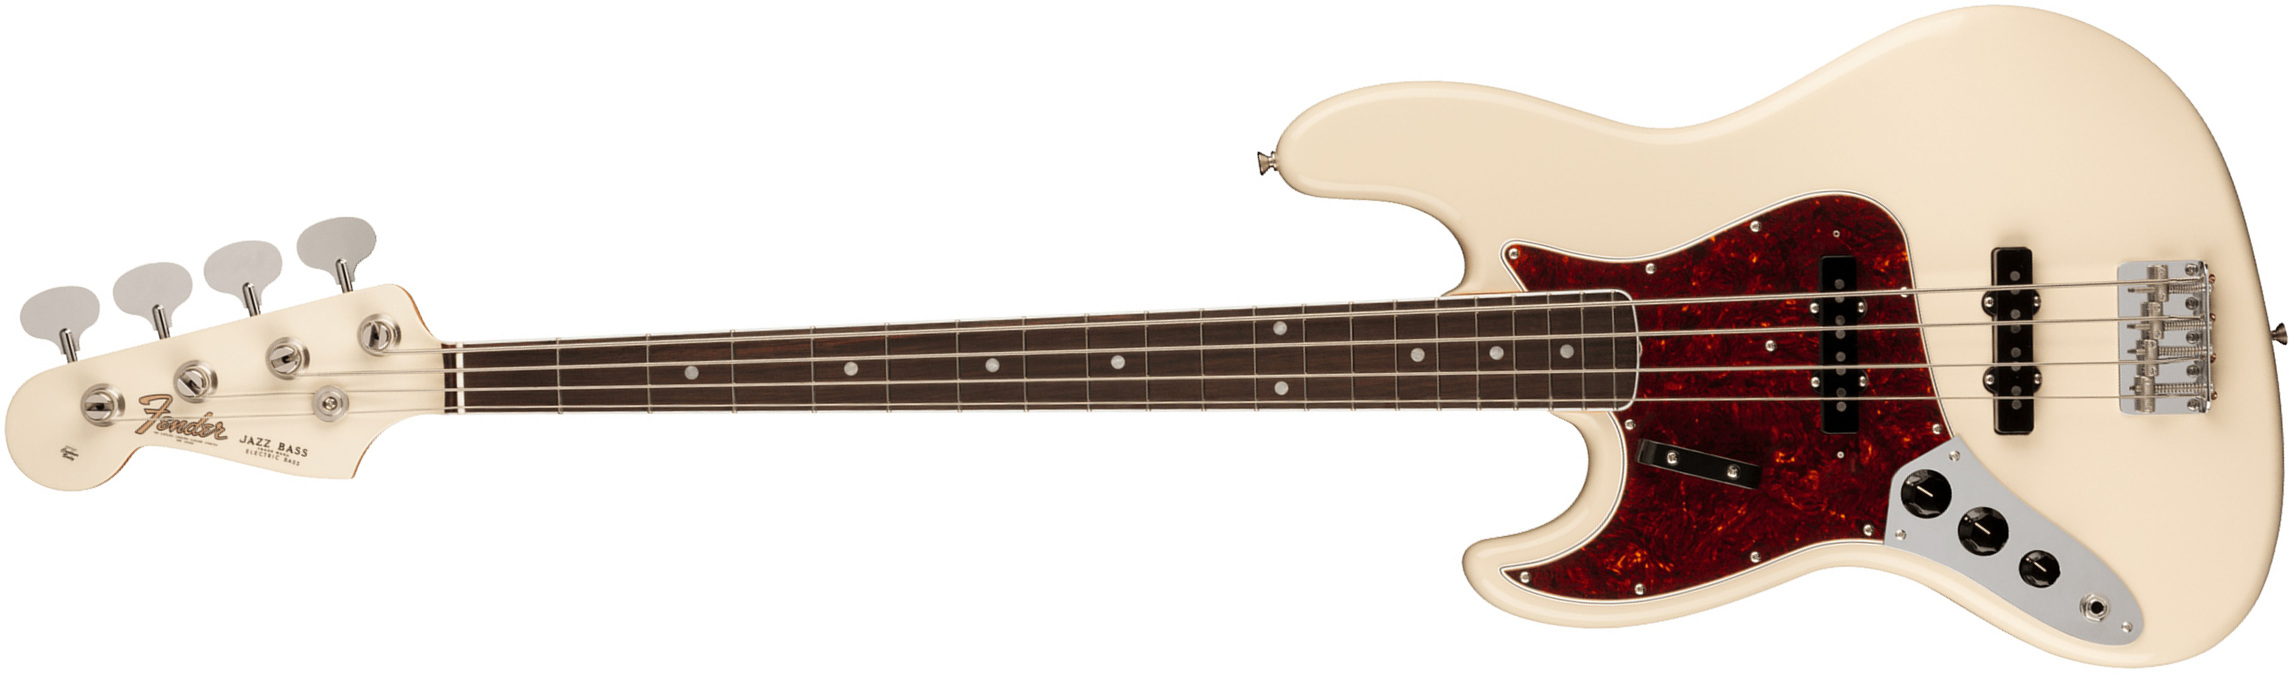 Fender Jazz Bass 1966 American Vintage Ii Lh Gaucher Usa Rw - Olympic White - Solid body electric bass - Main picture